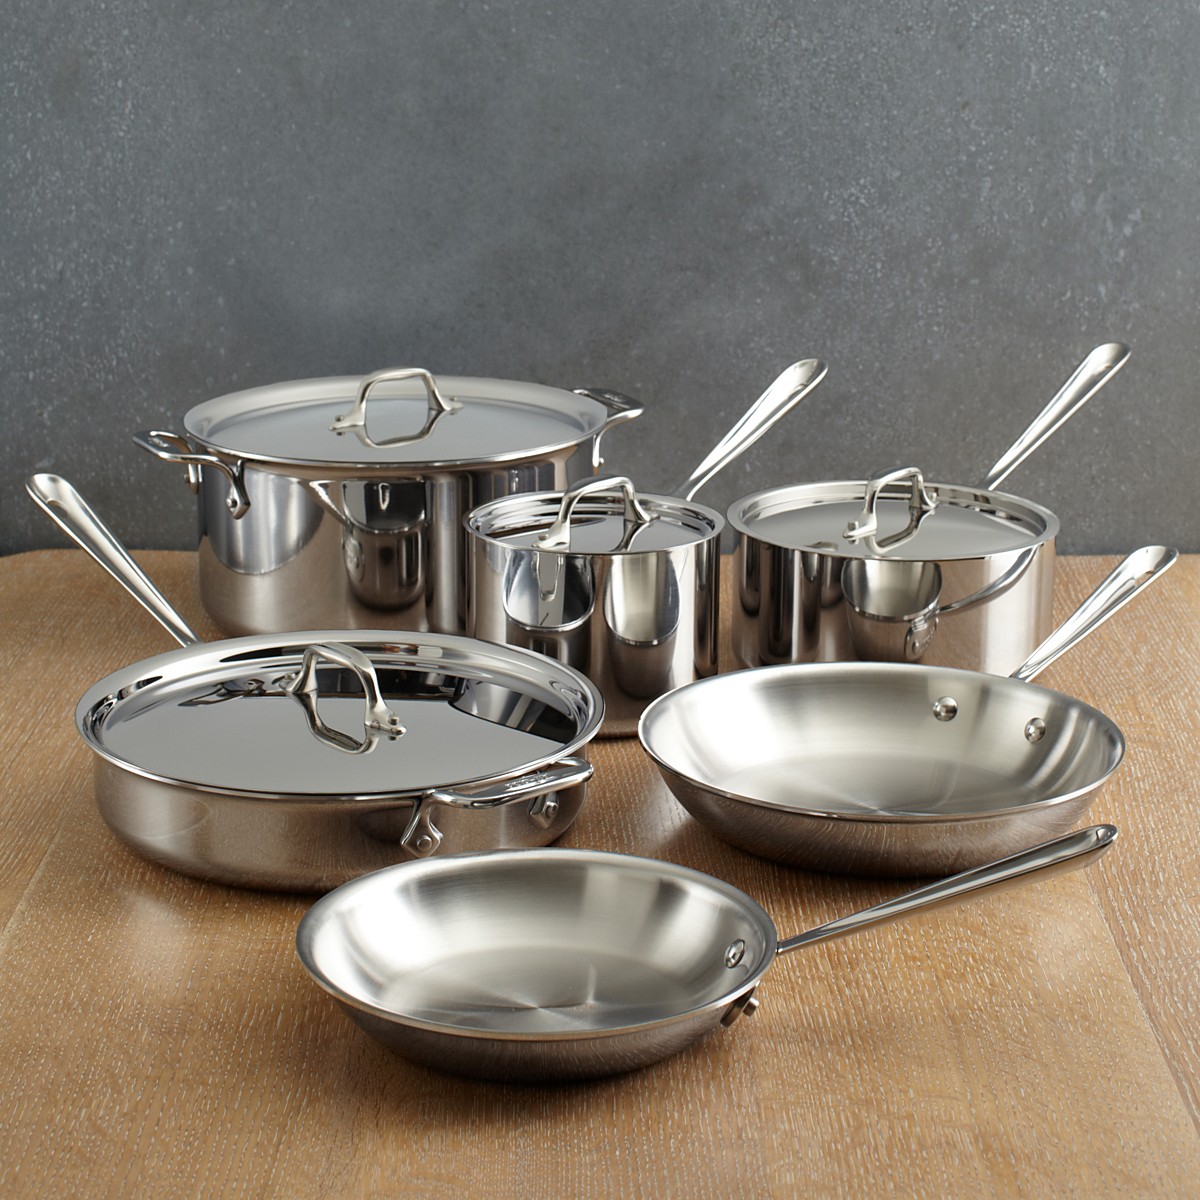 Stainless Steel Pots for the Modern Kitchen All-clad Stainless Steel Cookware Set 10-piece